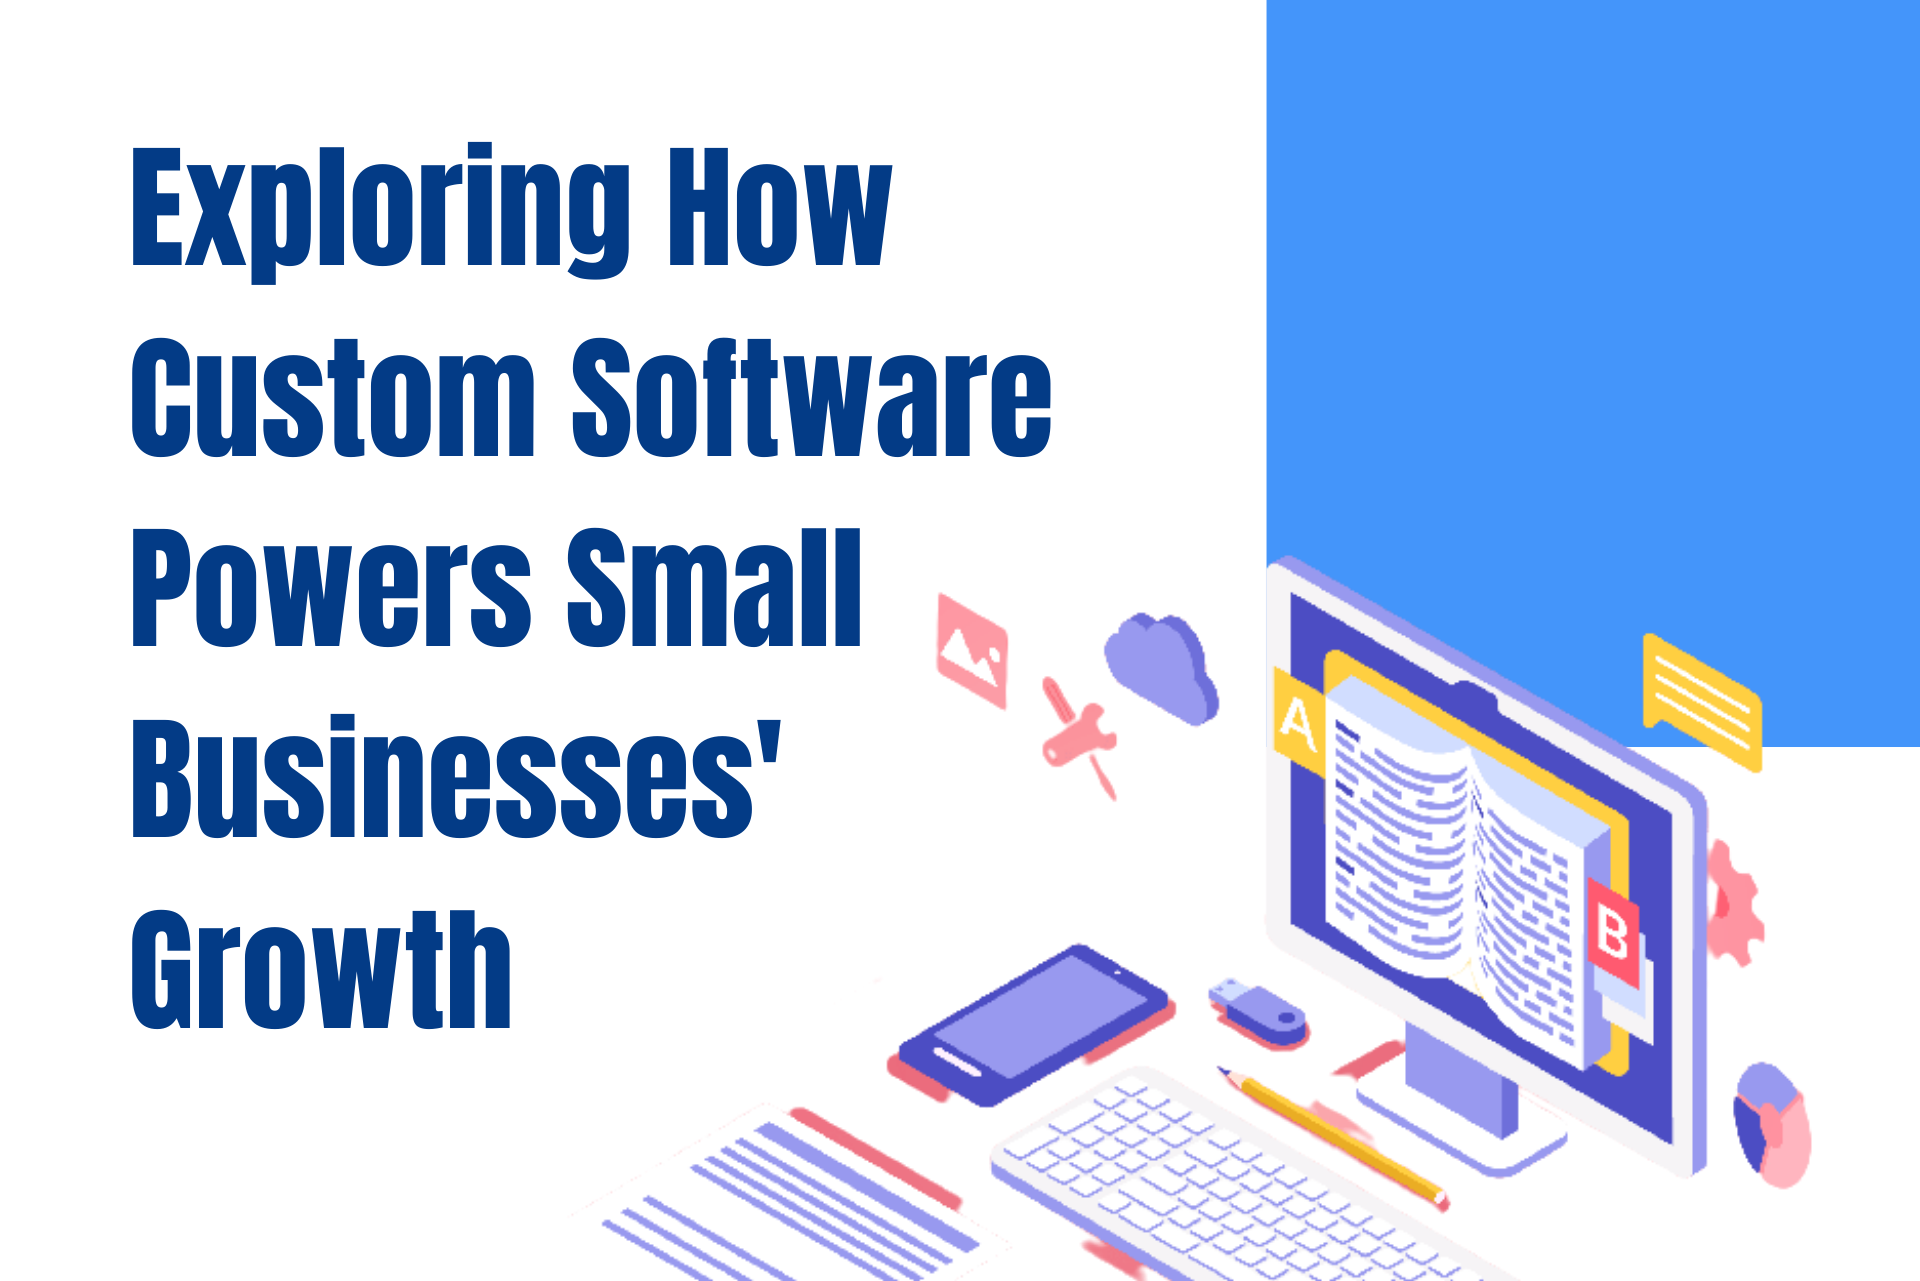 Exploring How Custom Software Powers Small Businesses' Growth